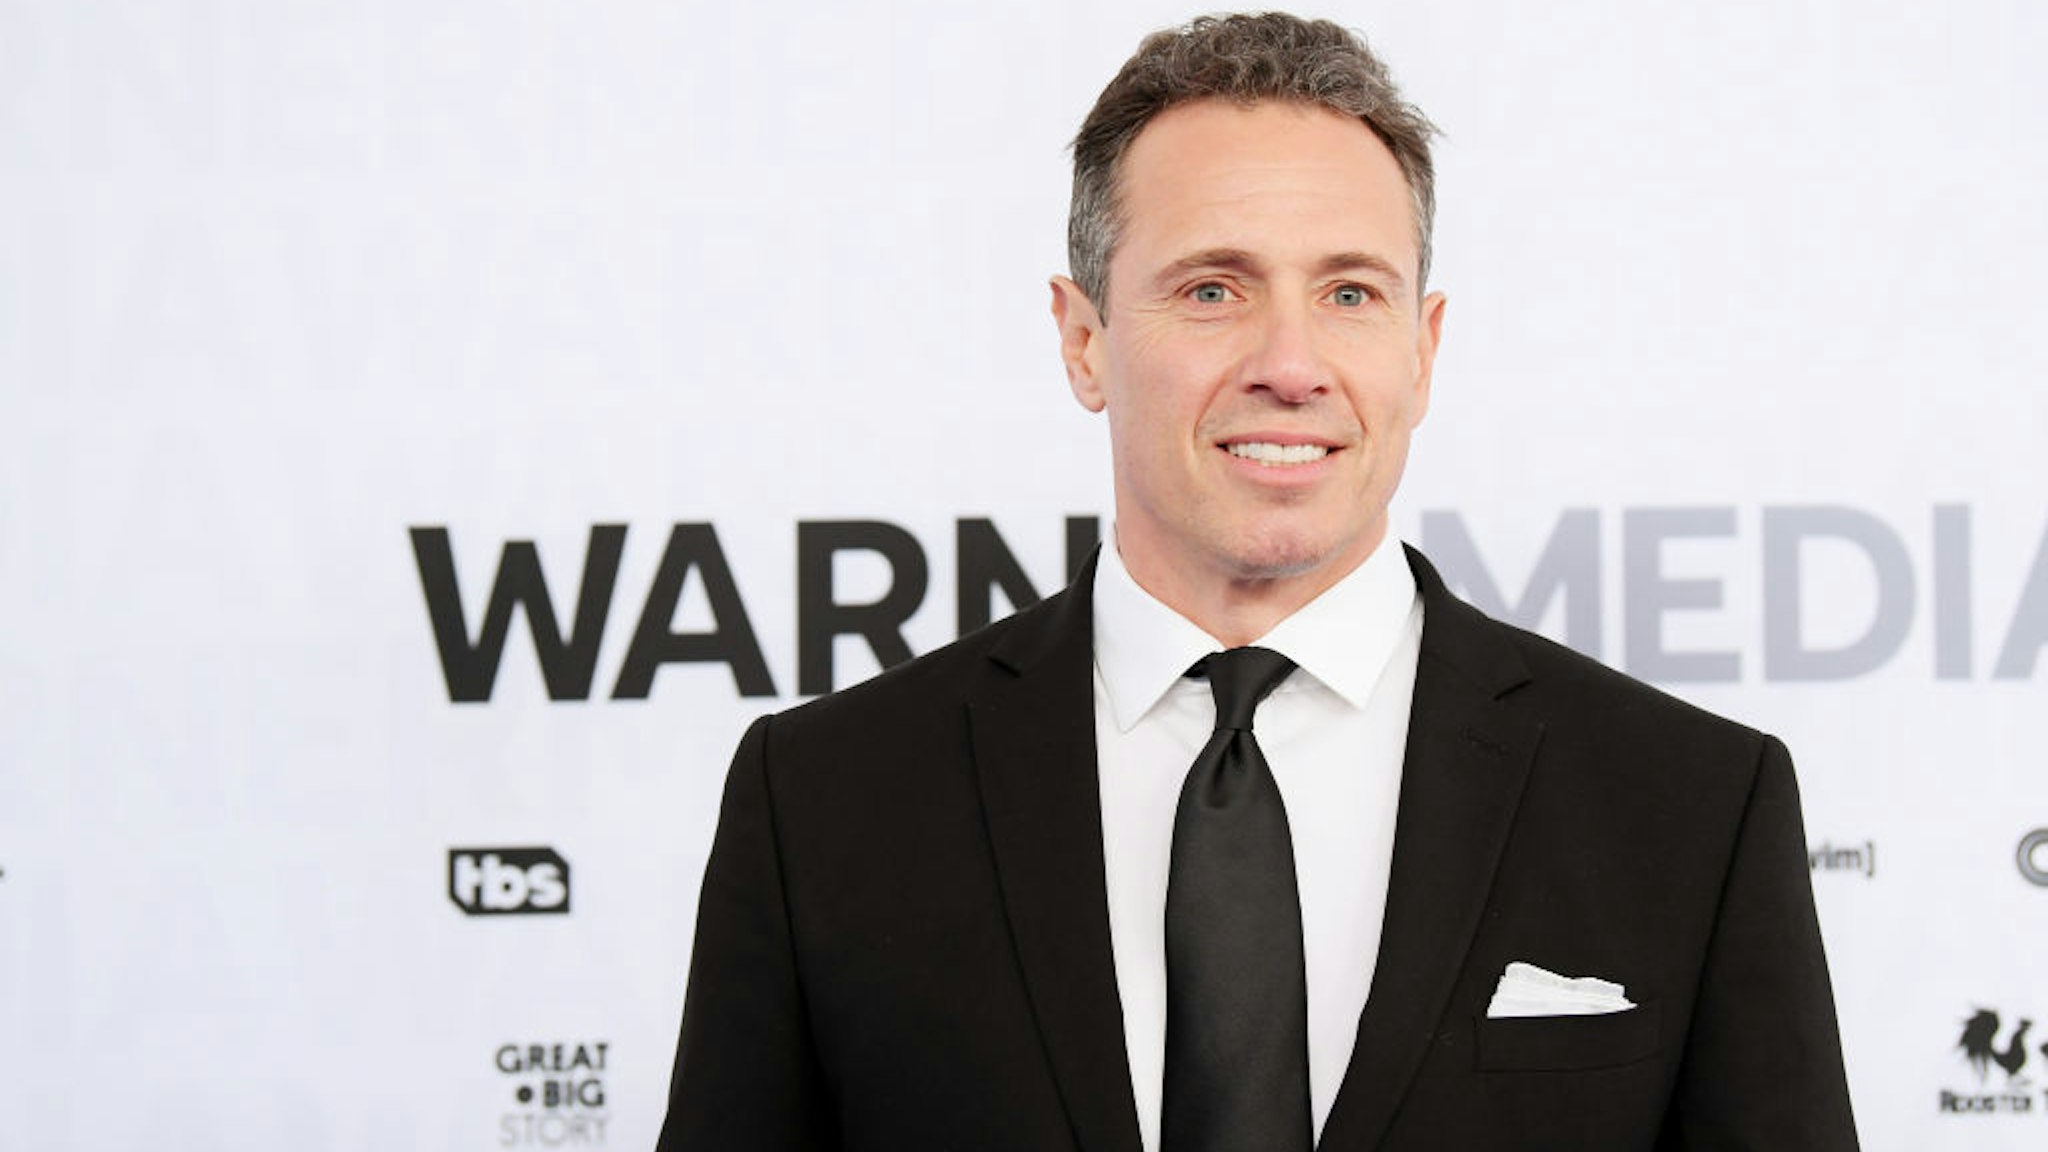 Chris Cuomo of CNN’s Cuomo Prime Time attends the WarnerMedia Upfront 2019 arrivals on the red carpet at The Theater at Madison Square Garden on May 15, 2019 in New York City.